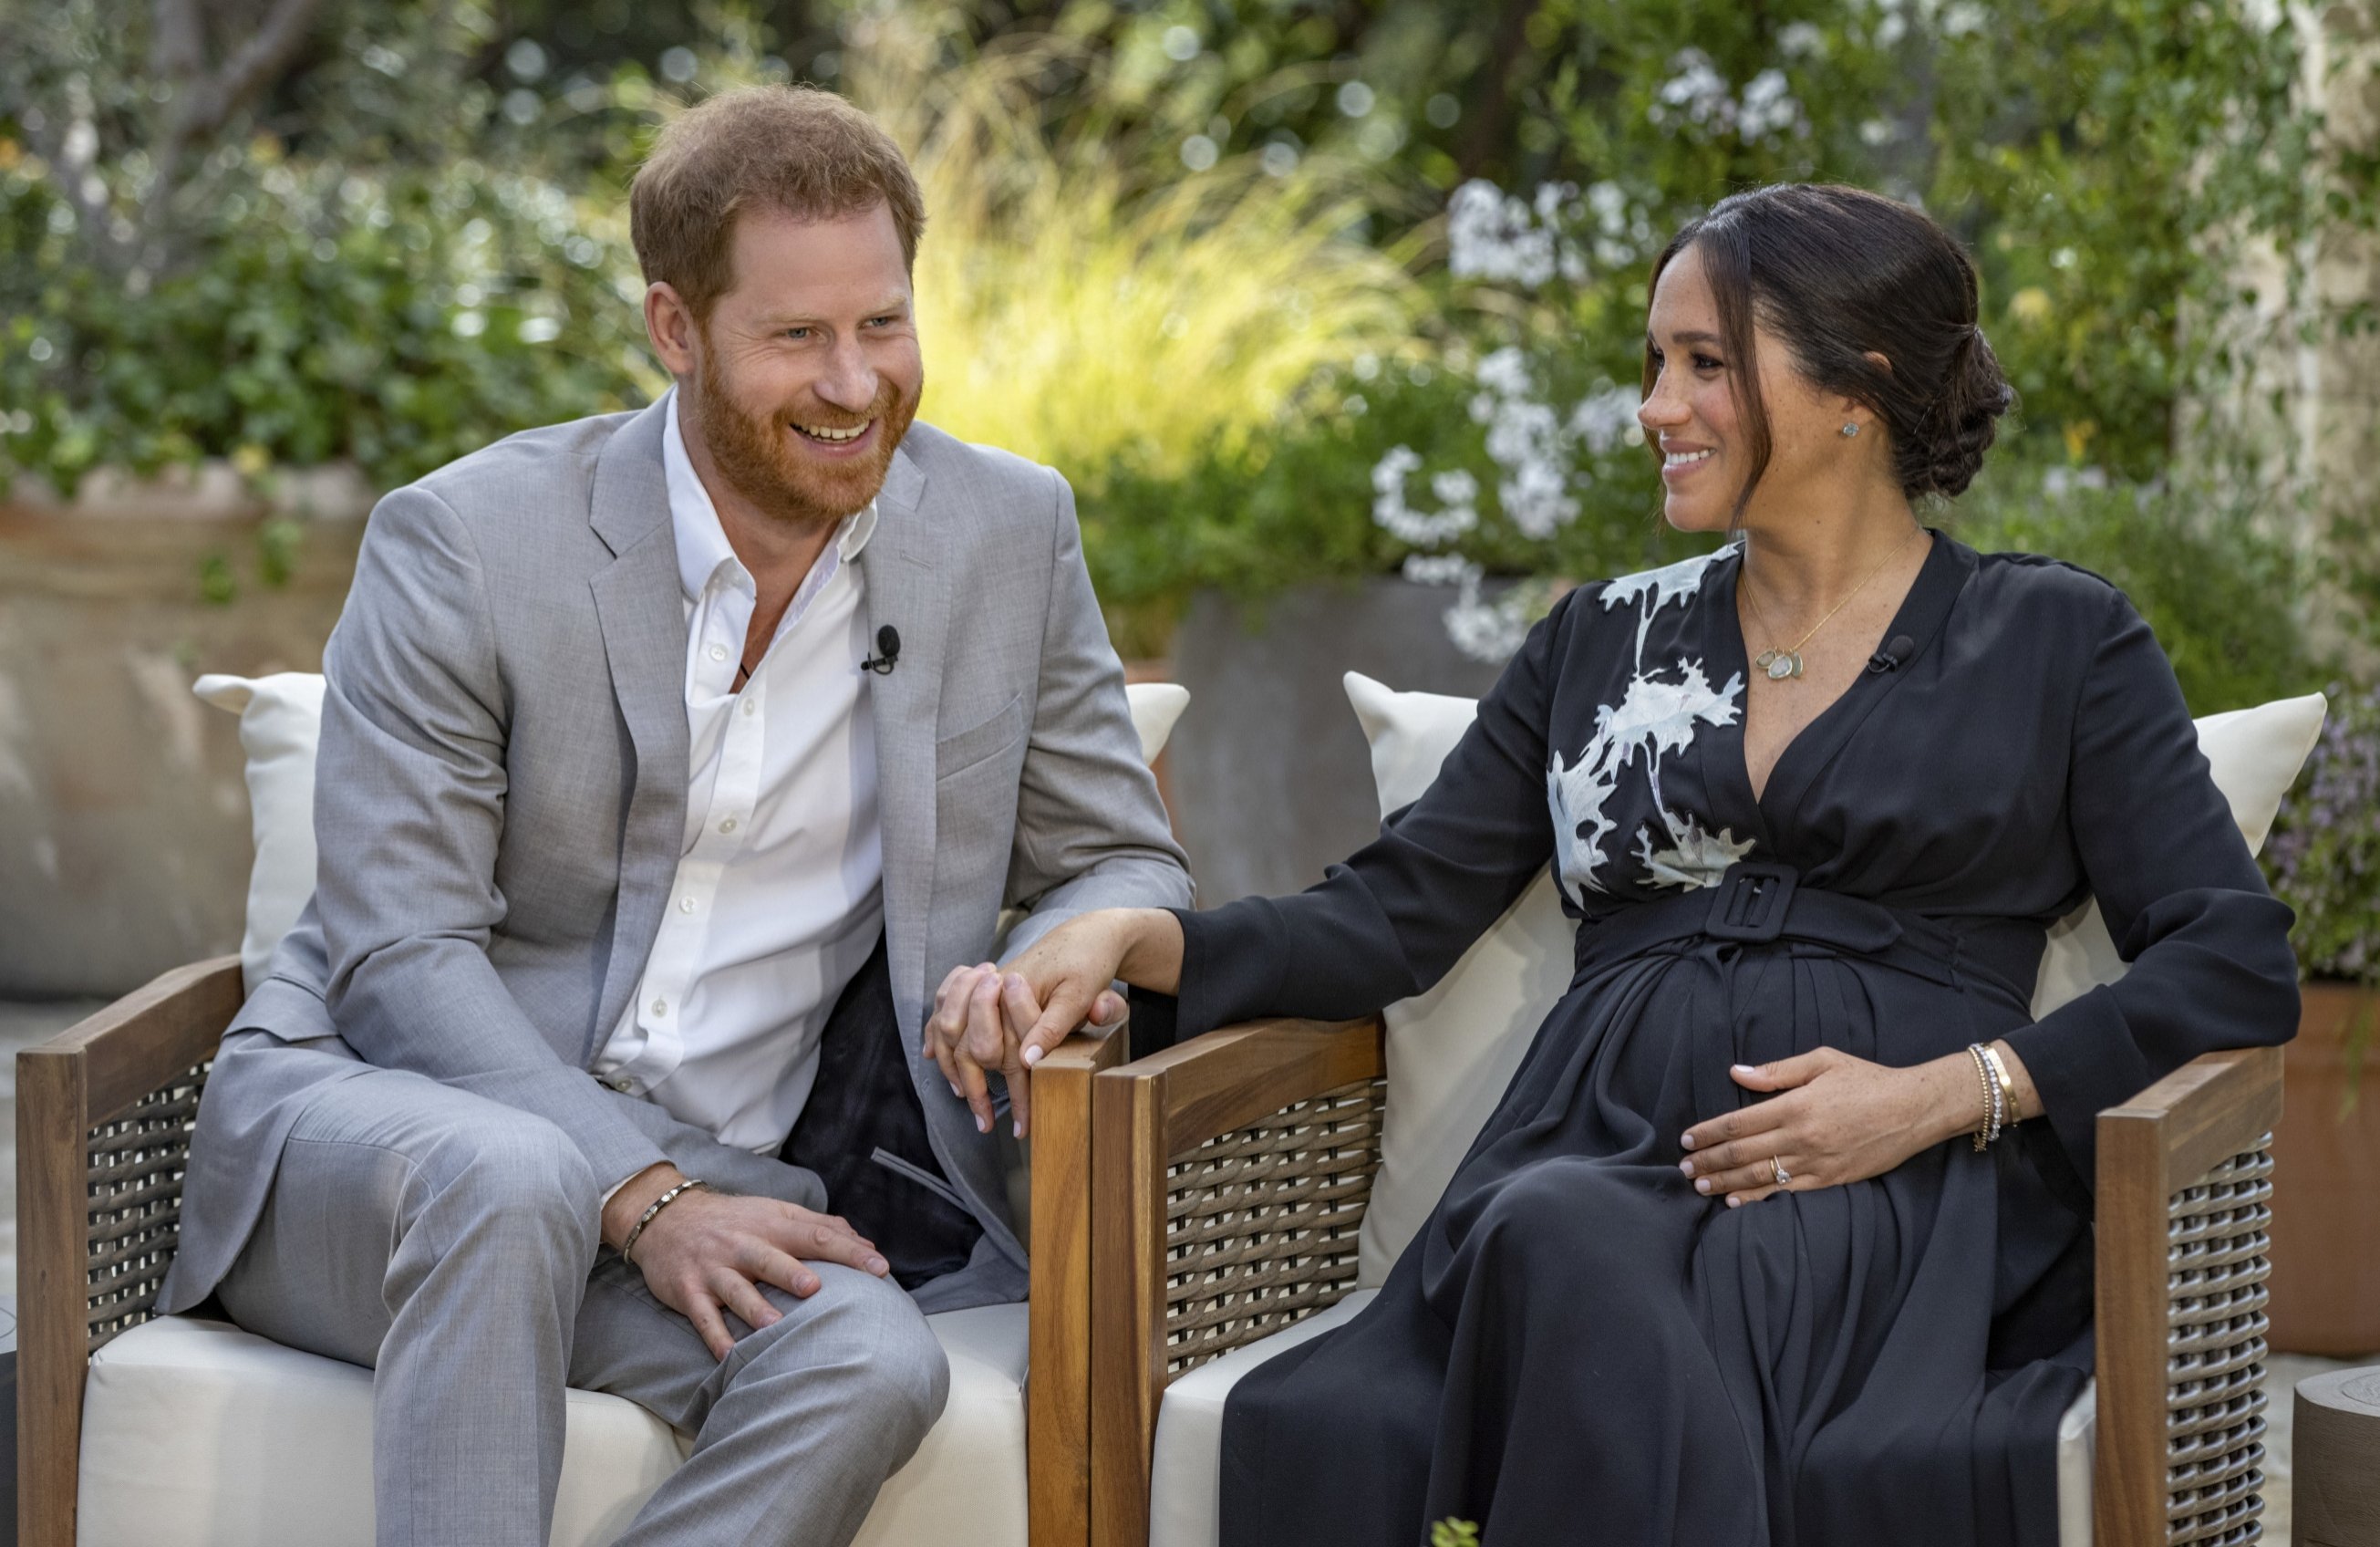 Britain's Prince Harry (L) and his wife Meghan, Duchess of Sussex, speak about expecting their second child with U.S. television host Oprah Winfrey, U.S., March 7, 2021. (AP)